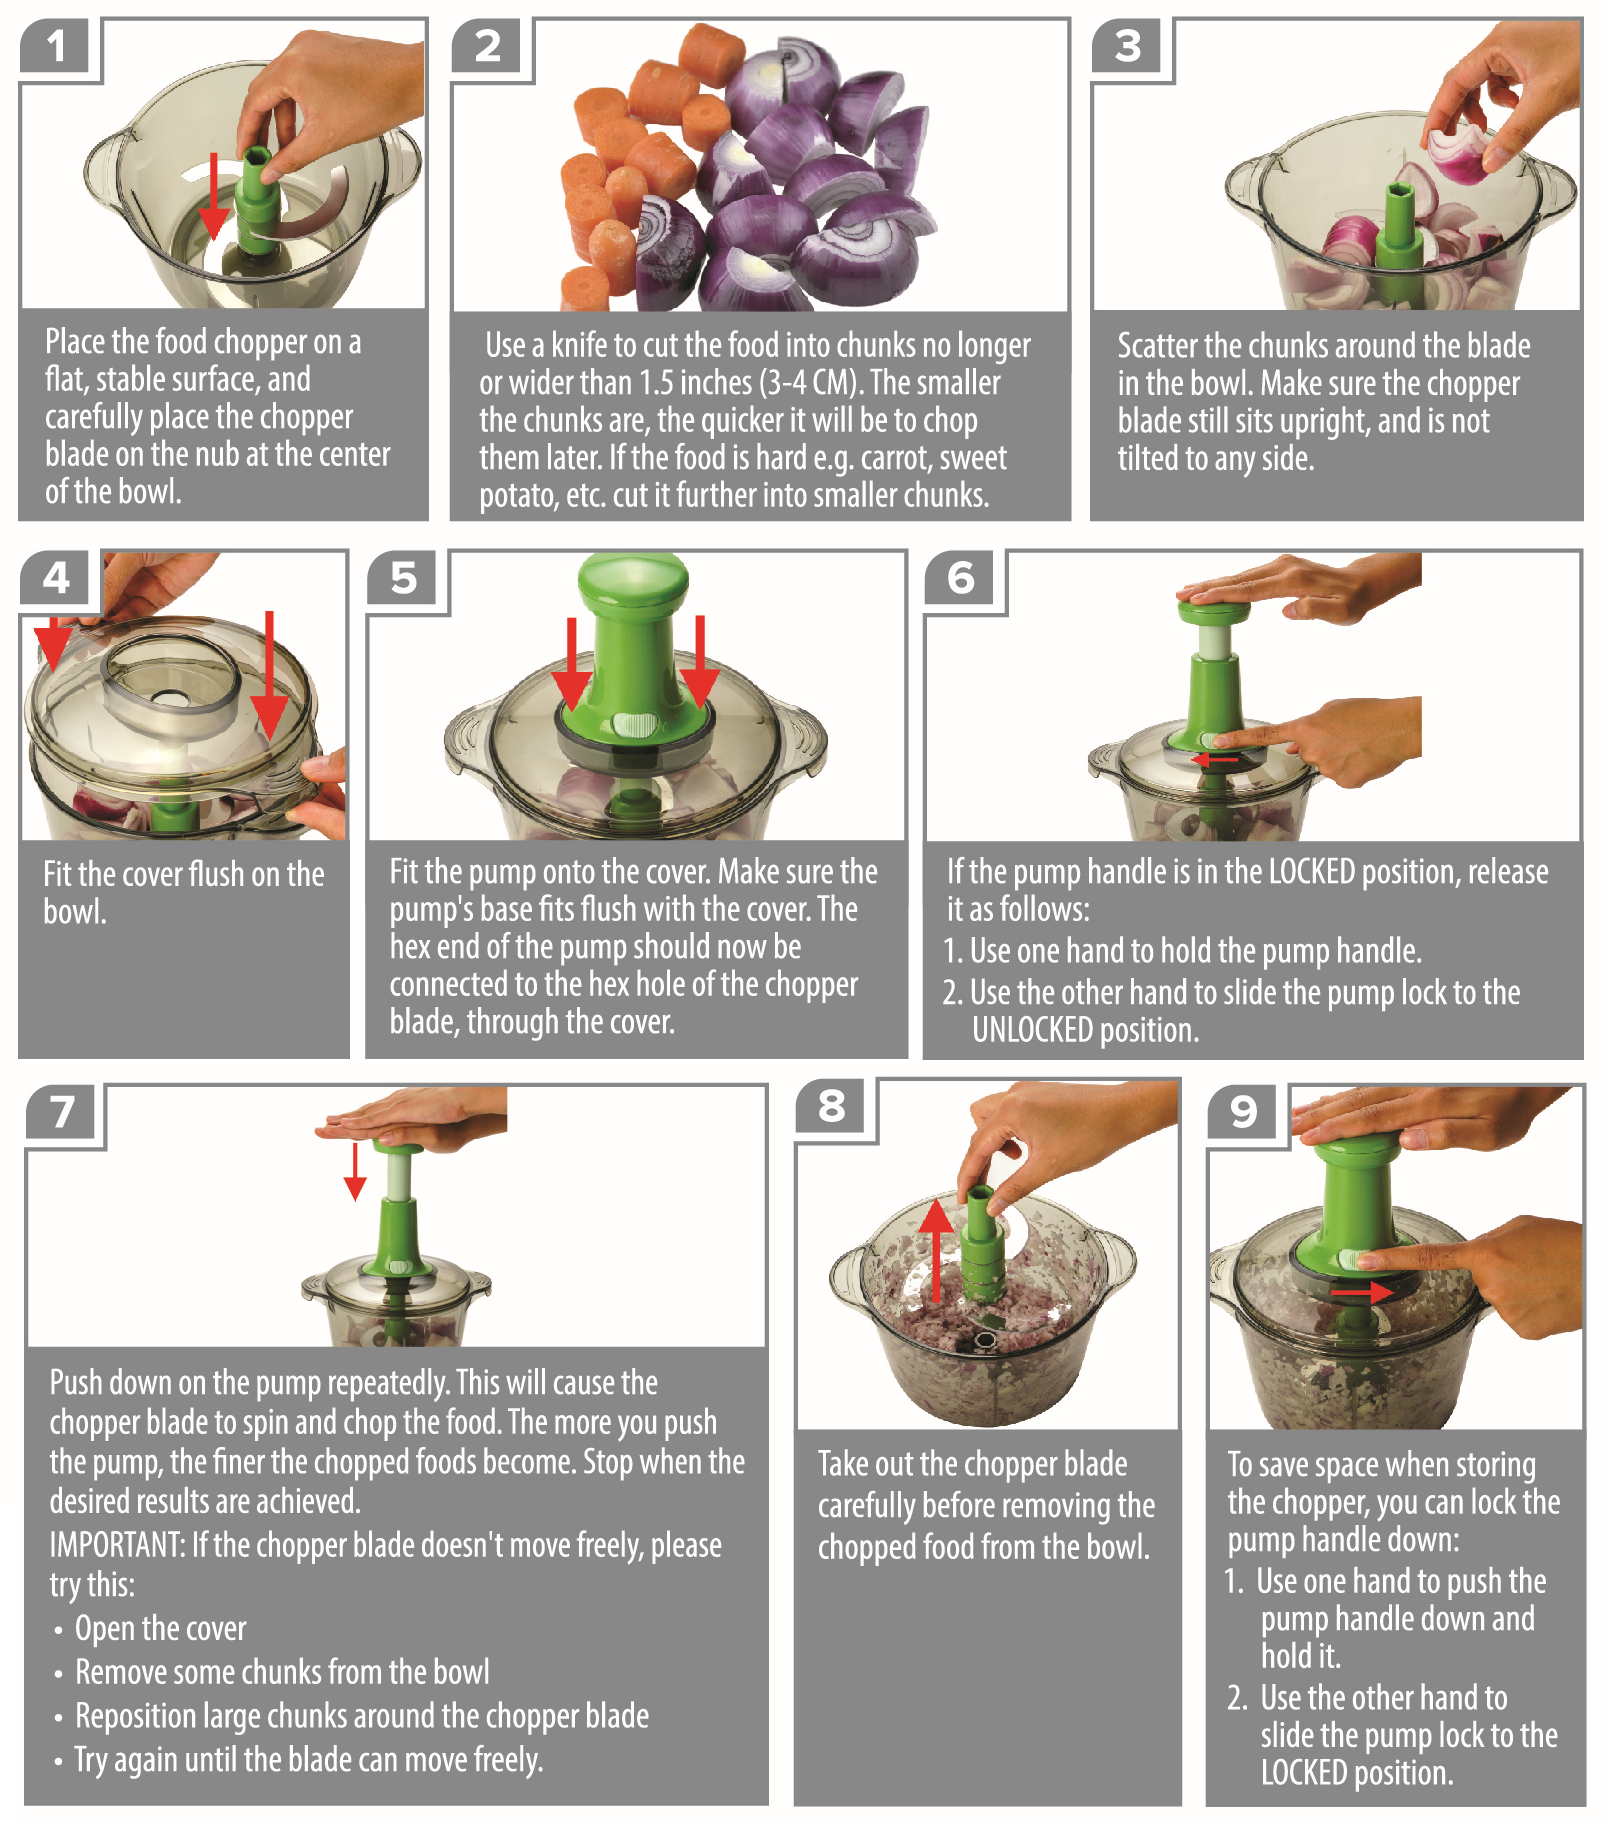 How to Use to the Brieftons Express Food Chopper (BR-EX-02) 